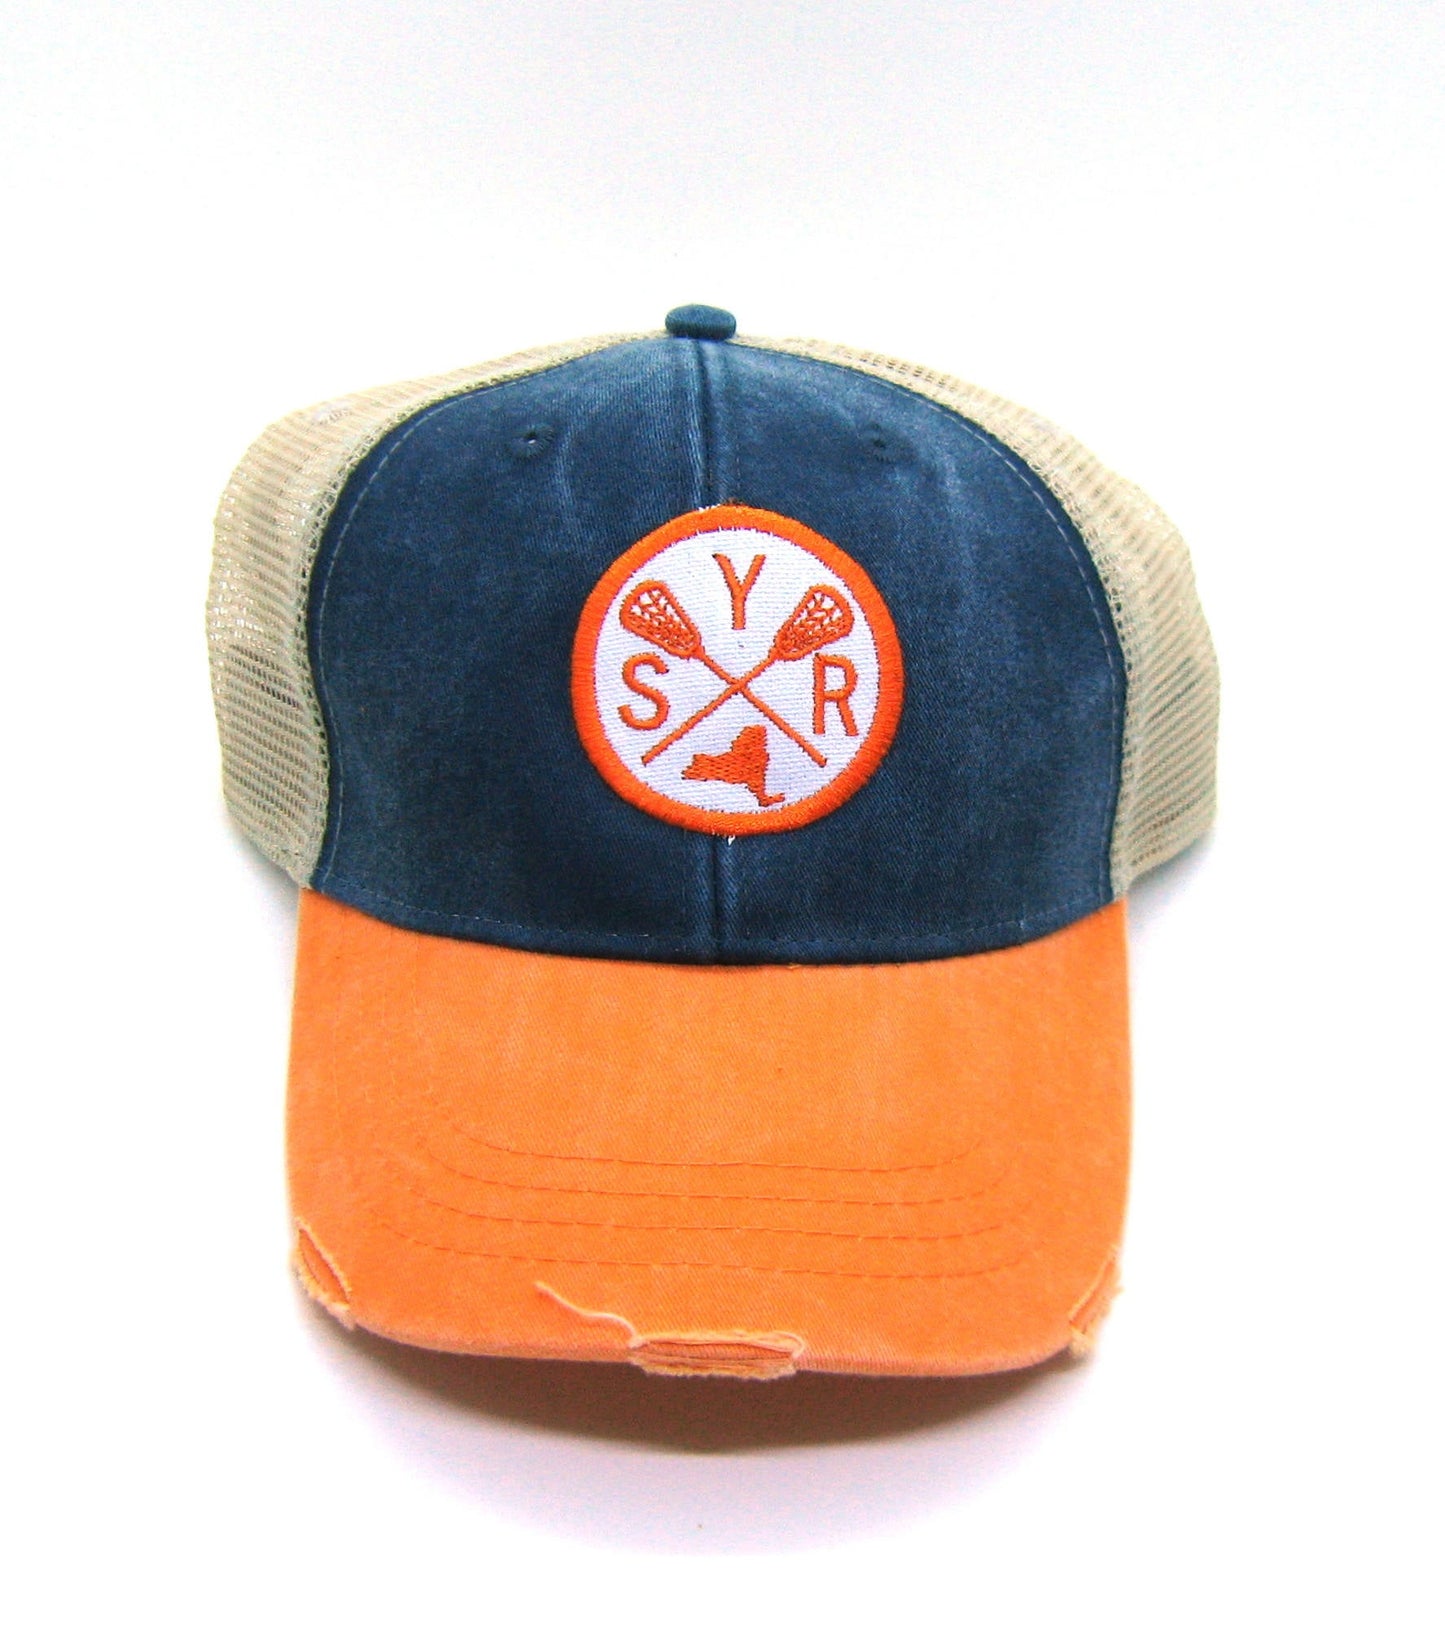 Syracuse Lacrosse Hat - Navy and Orange Distressed Snapback Trucker Hat - New York Arrow Compass Patch